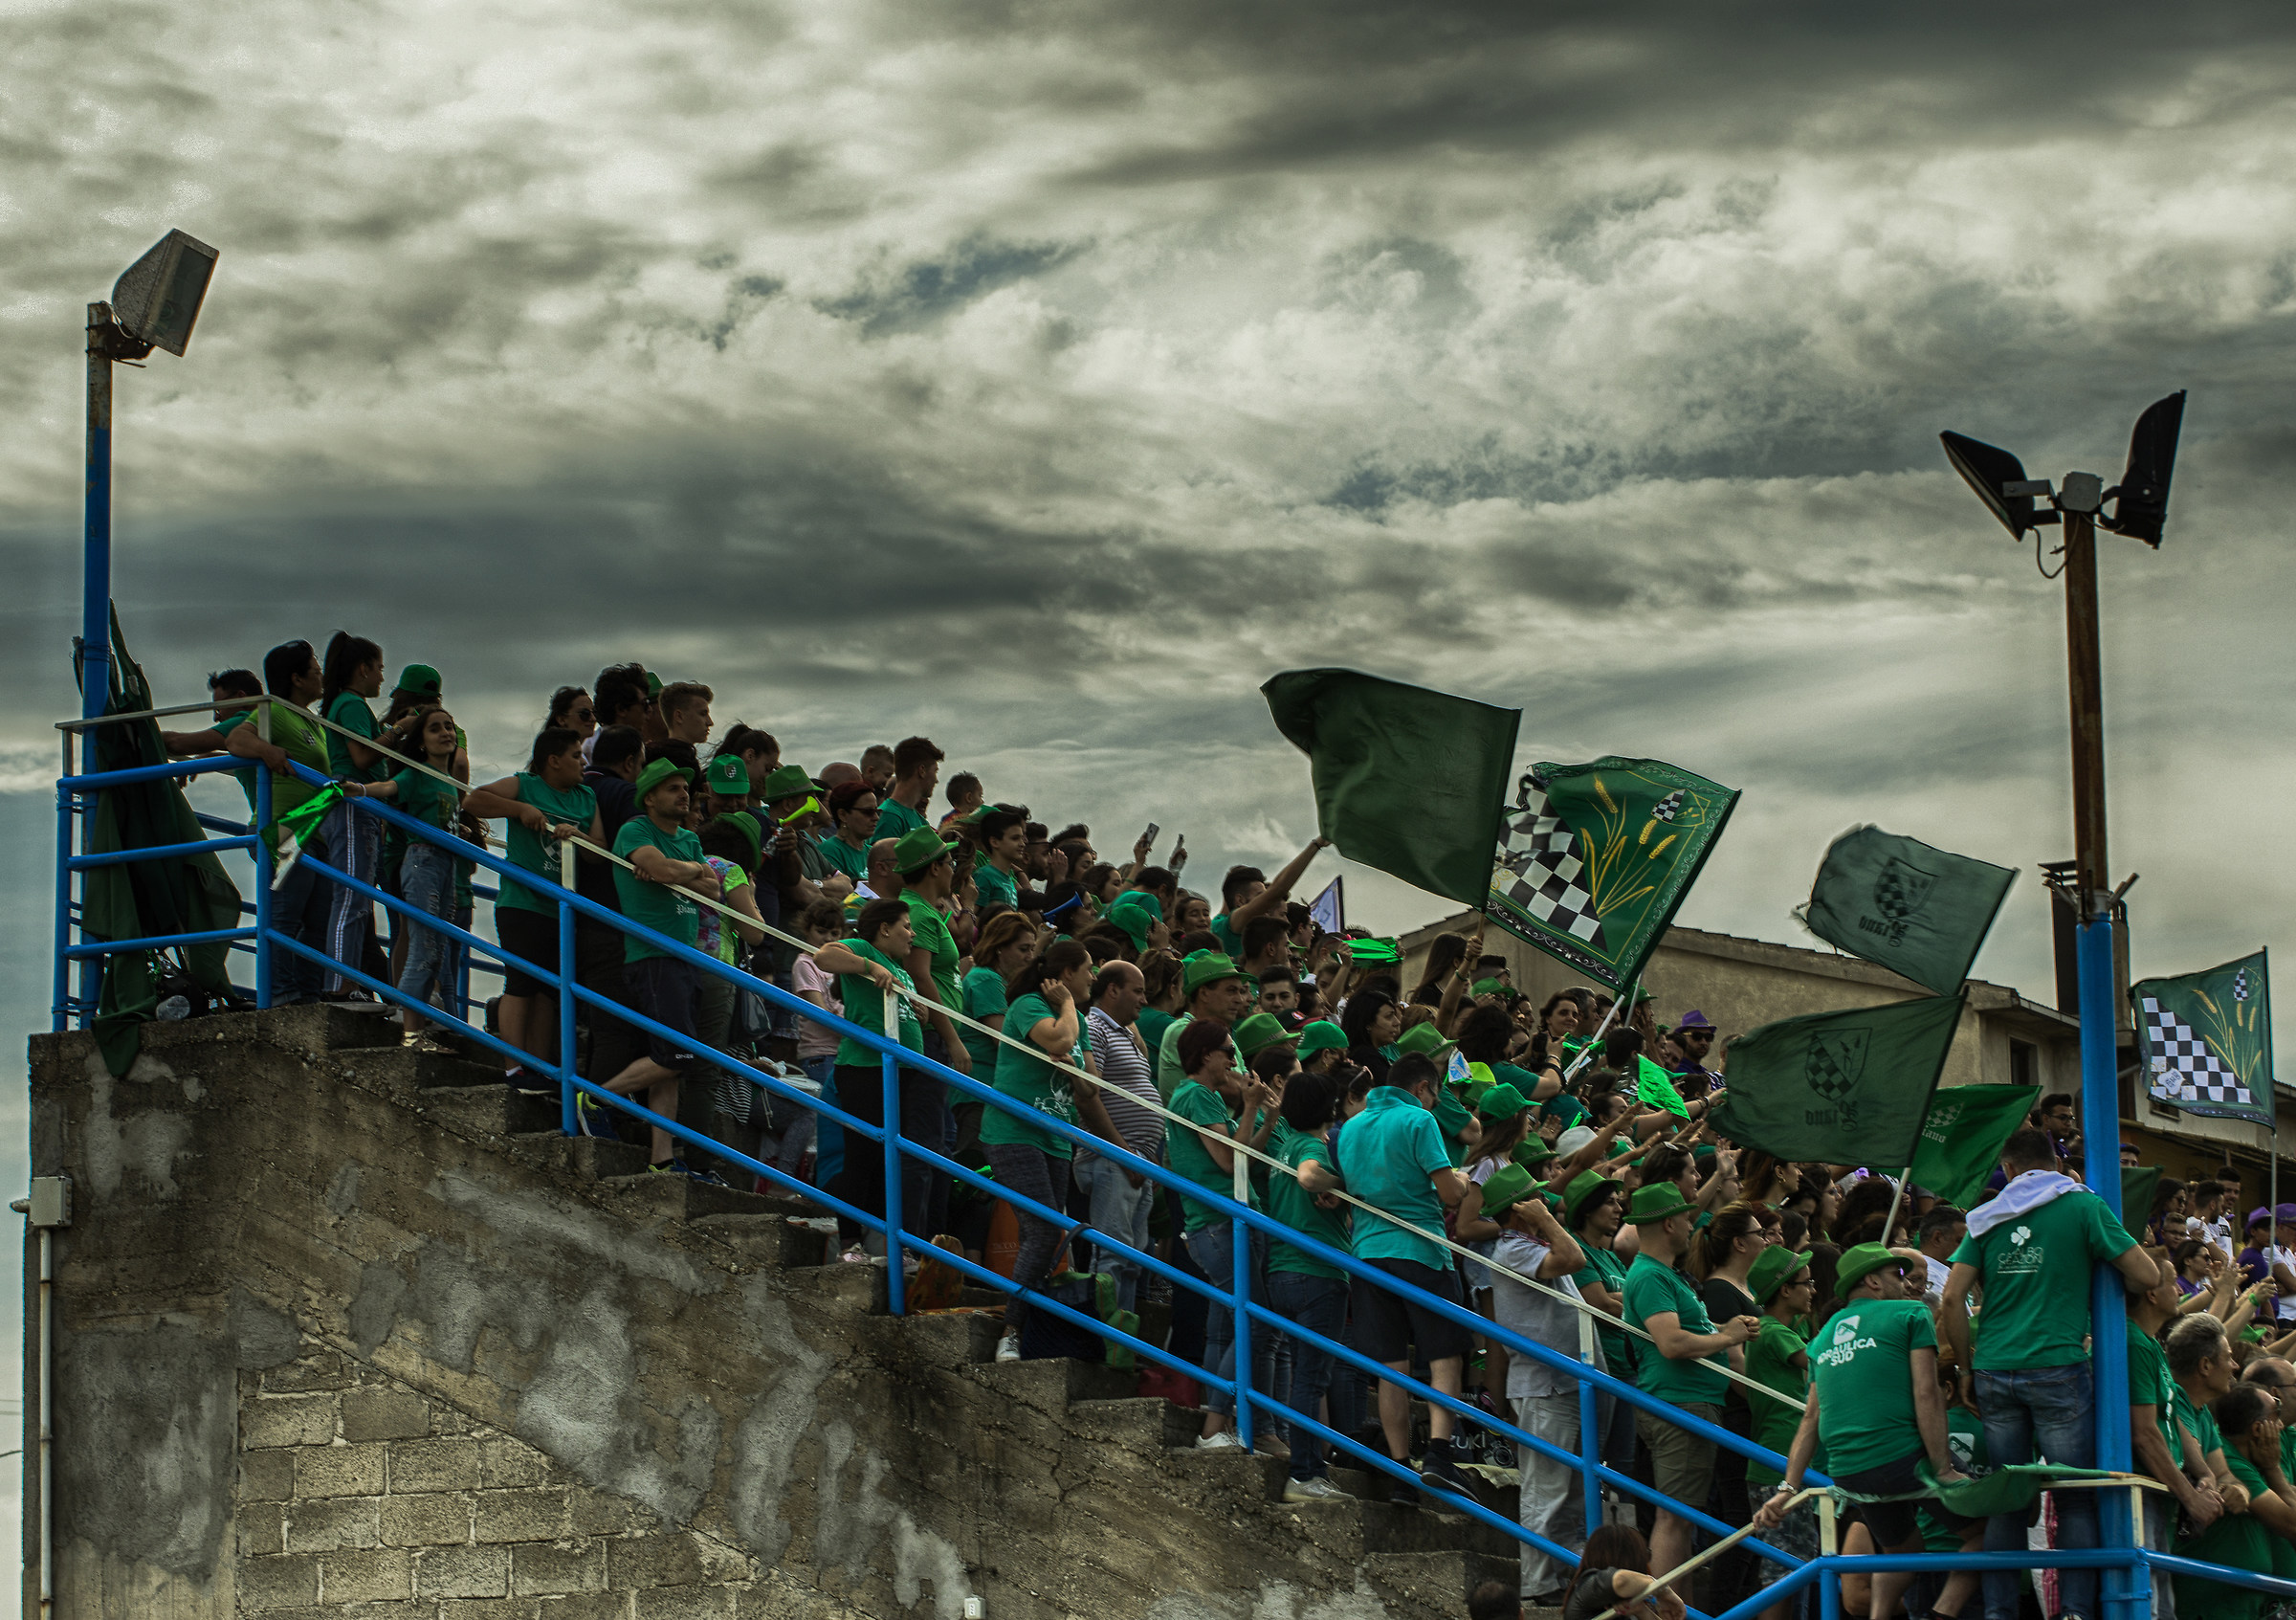 The fans of the green Team...